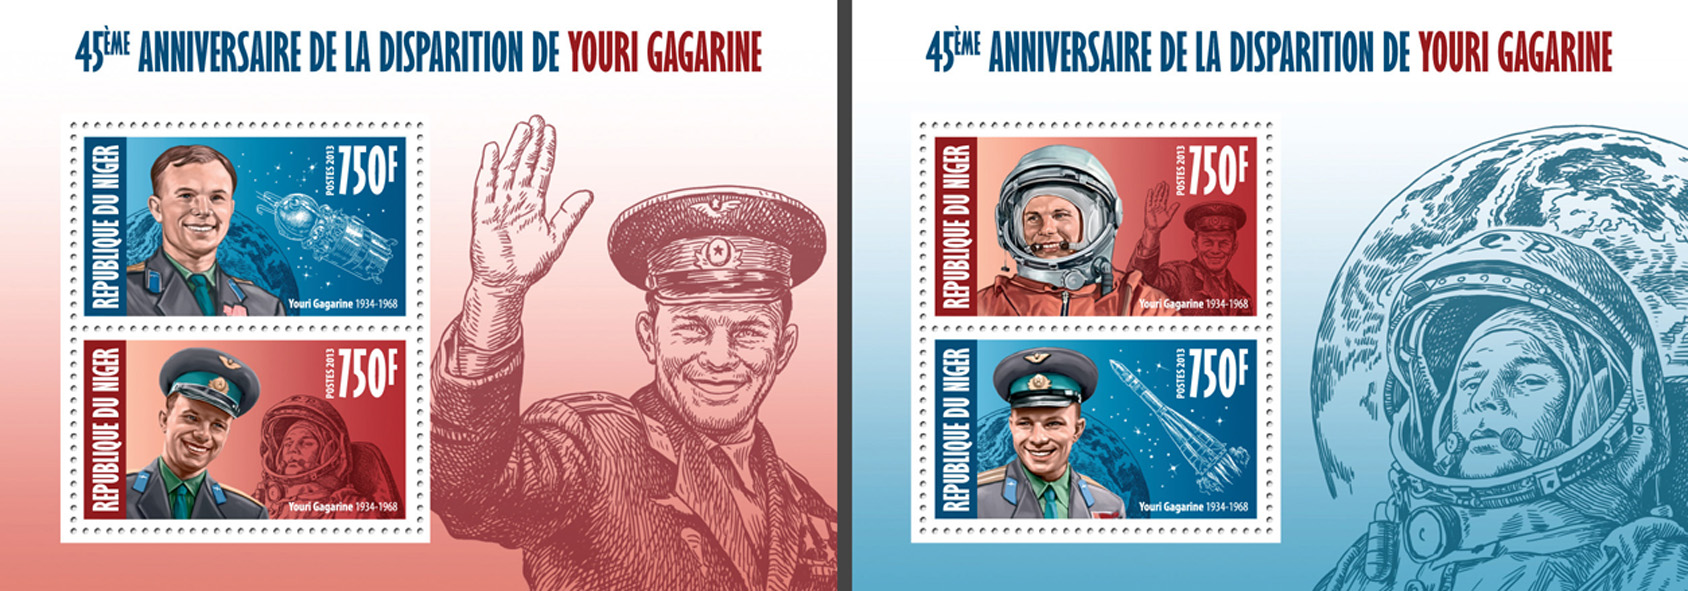 Yuri Gagarin - Issue of Niger postage stamps